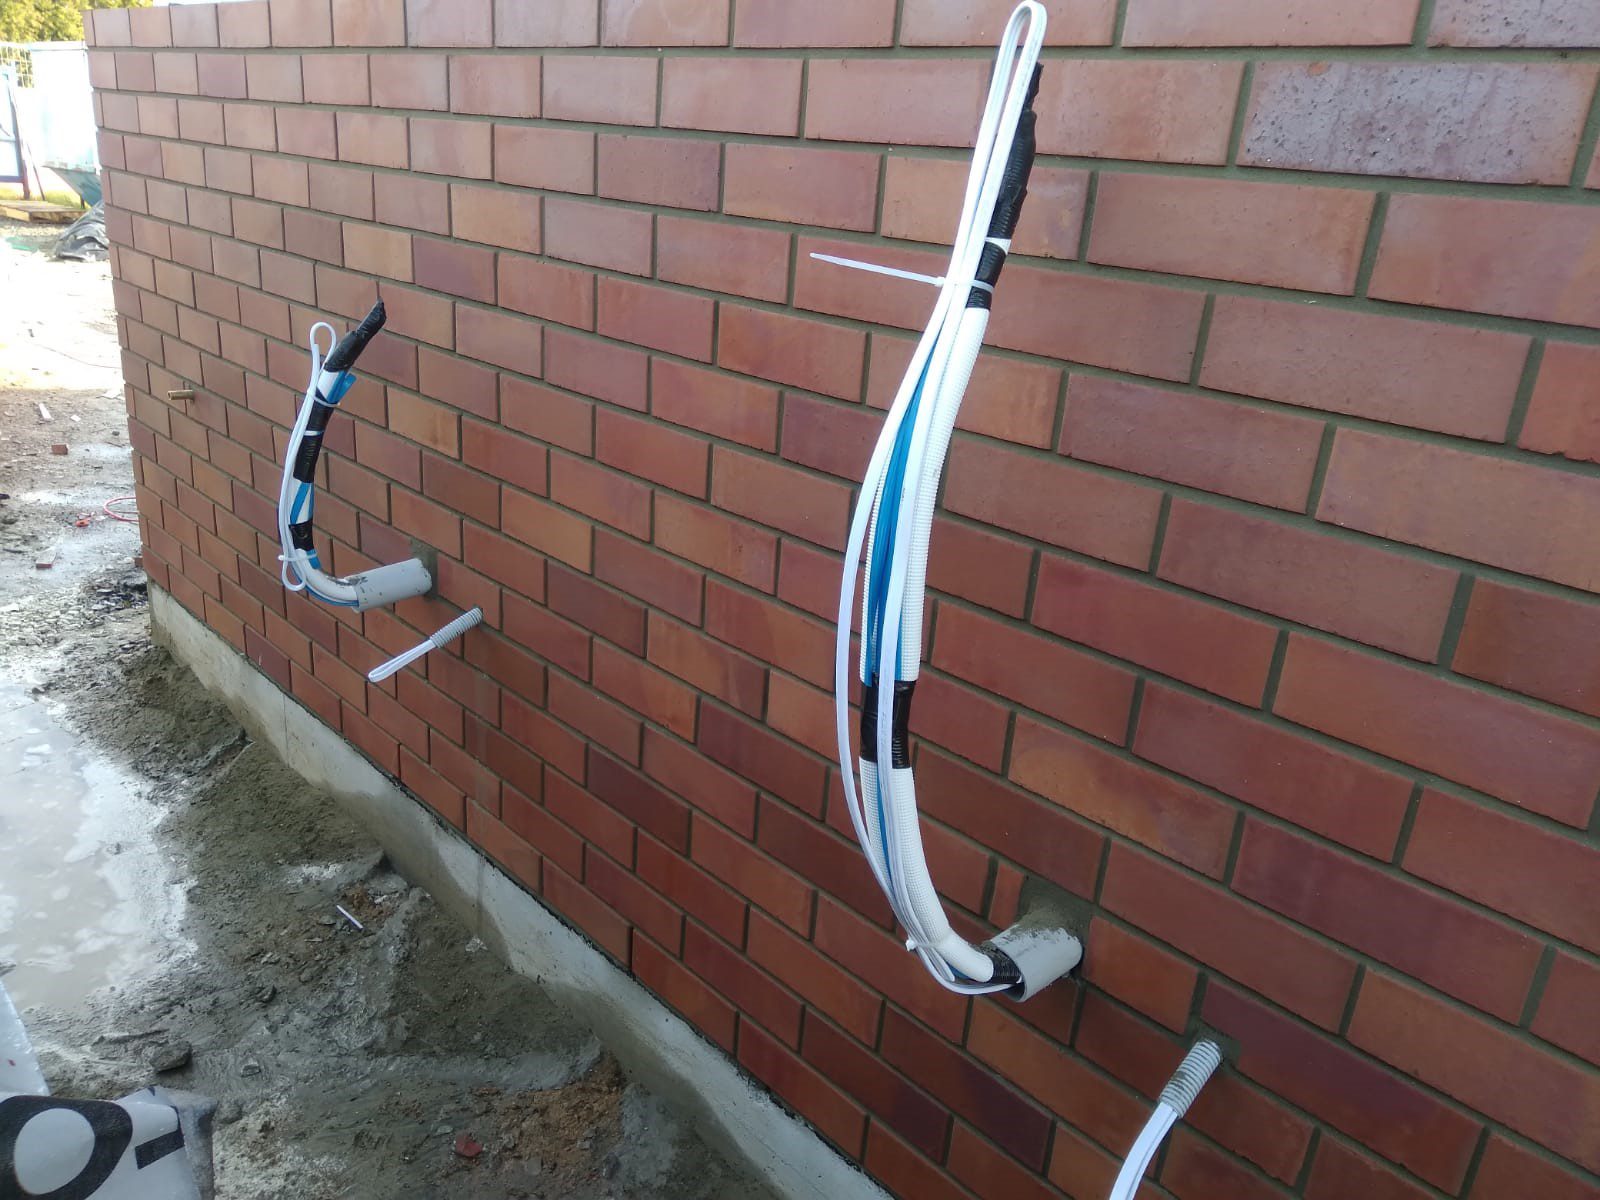 A brick wall with two pipes attached, possibly for air conditioning cables.